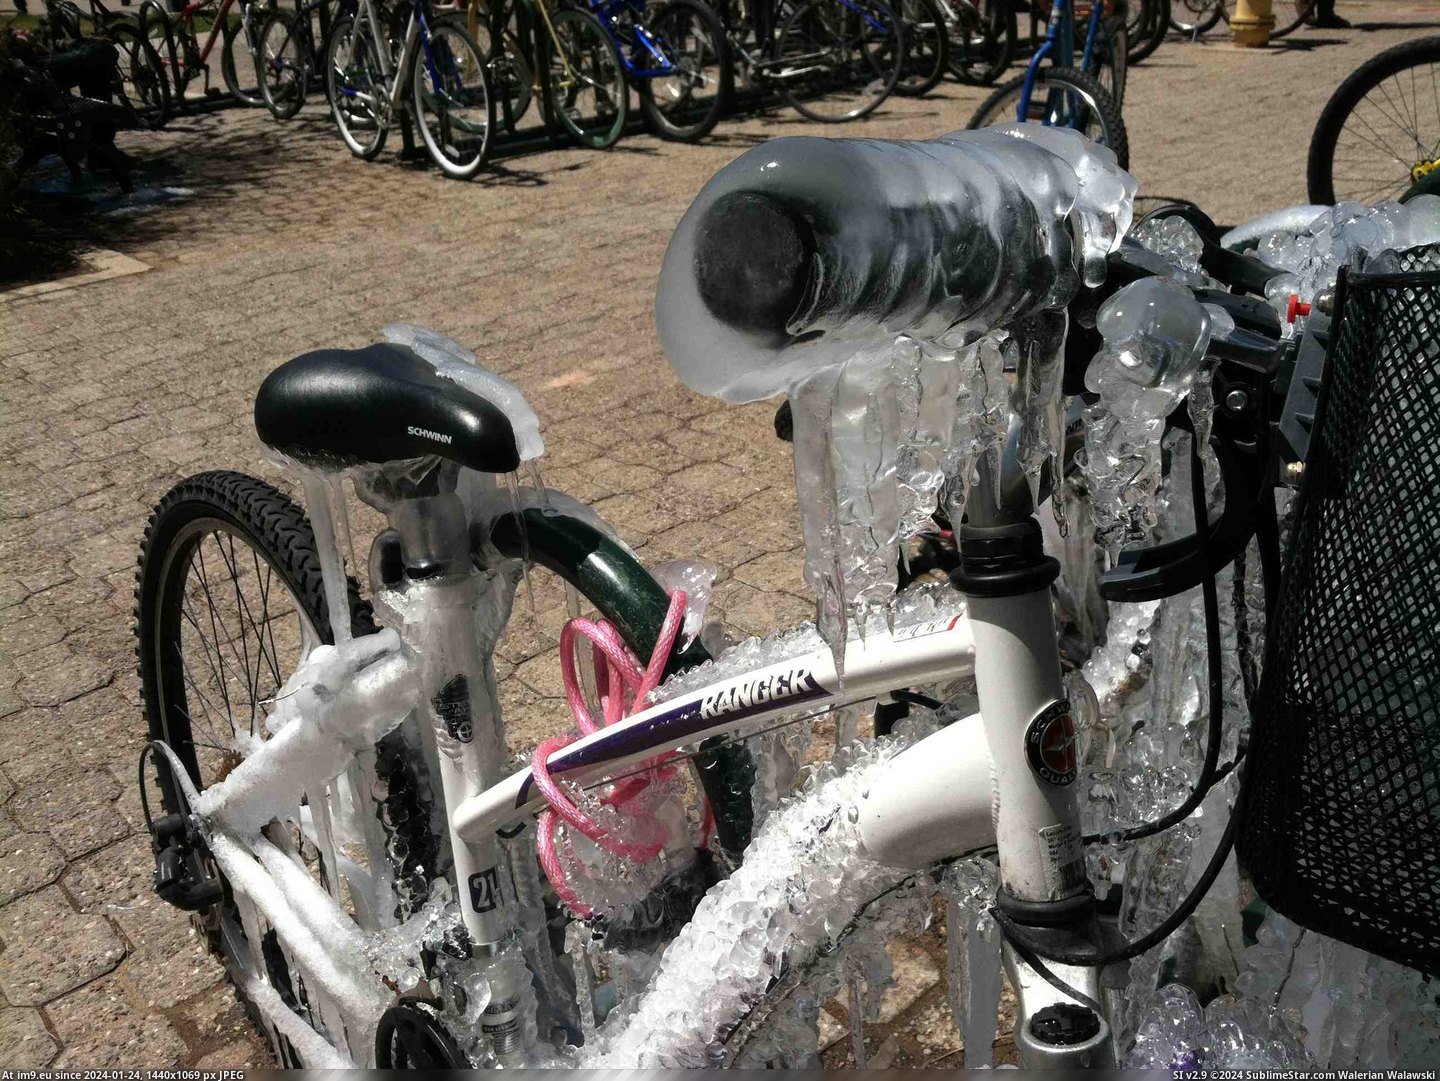 #Wtf #Bike #Temperatures #Sprinklers #Rack #Freezing [Wtf] When sprinklers come on next to the bike rack in freezing temperatures... Pic. (Image of album My r/WTF favs))